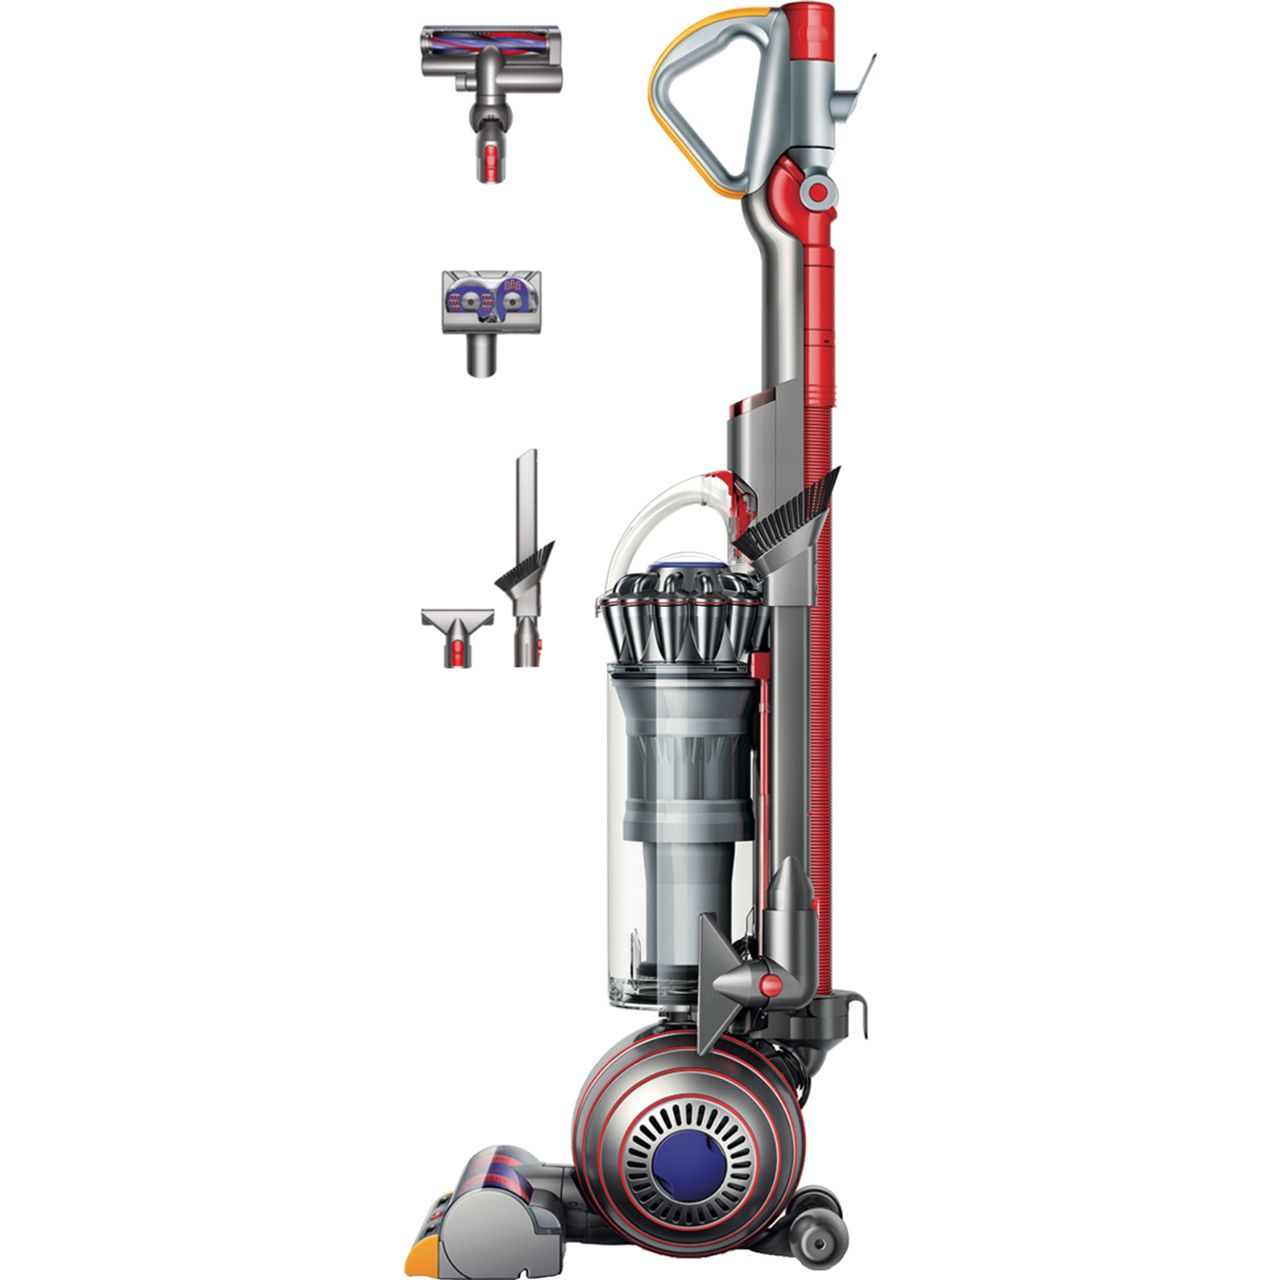 Dyson Ball Animal 2 Upright Vacuum Cleaner Review